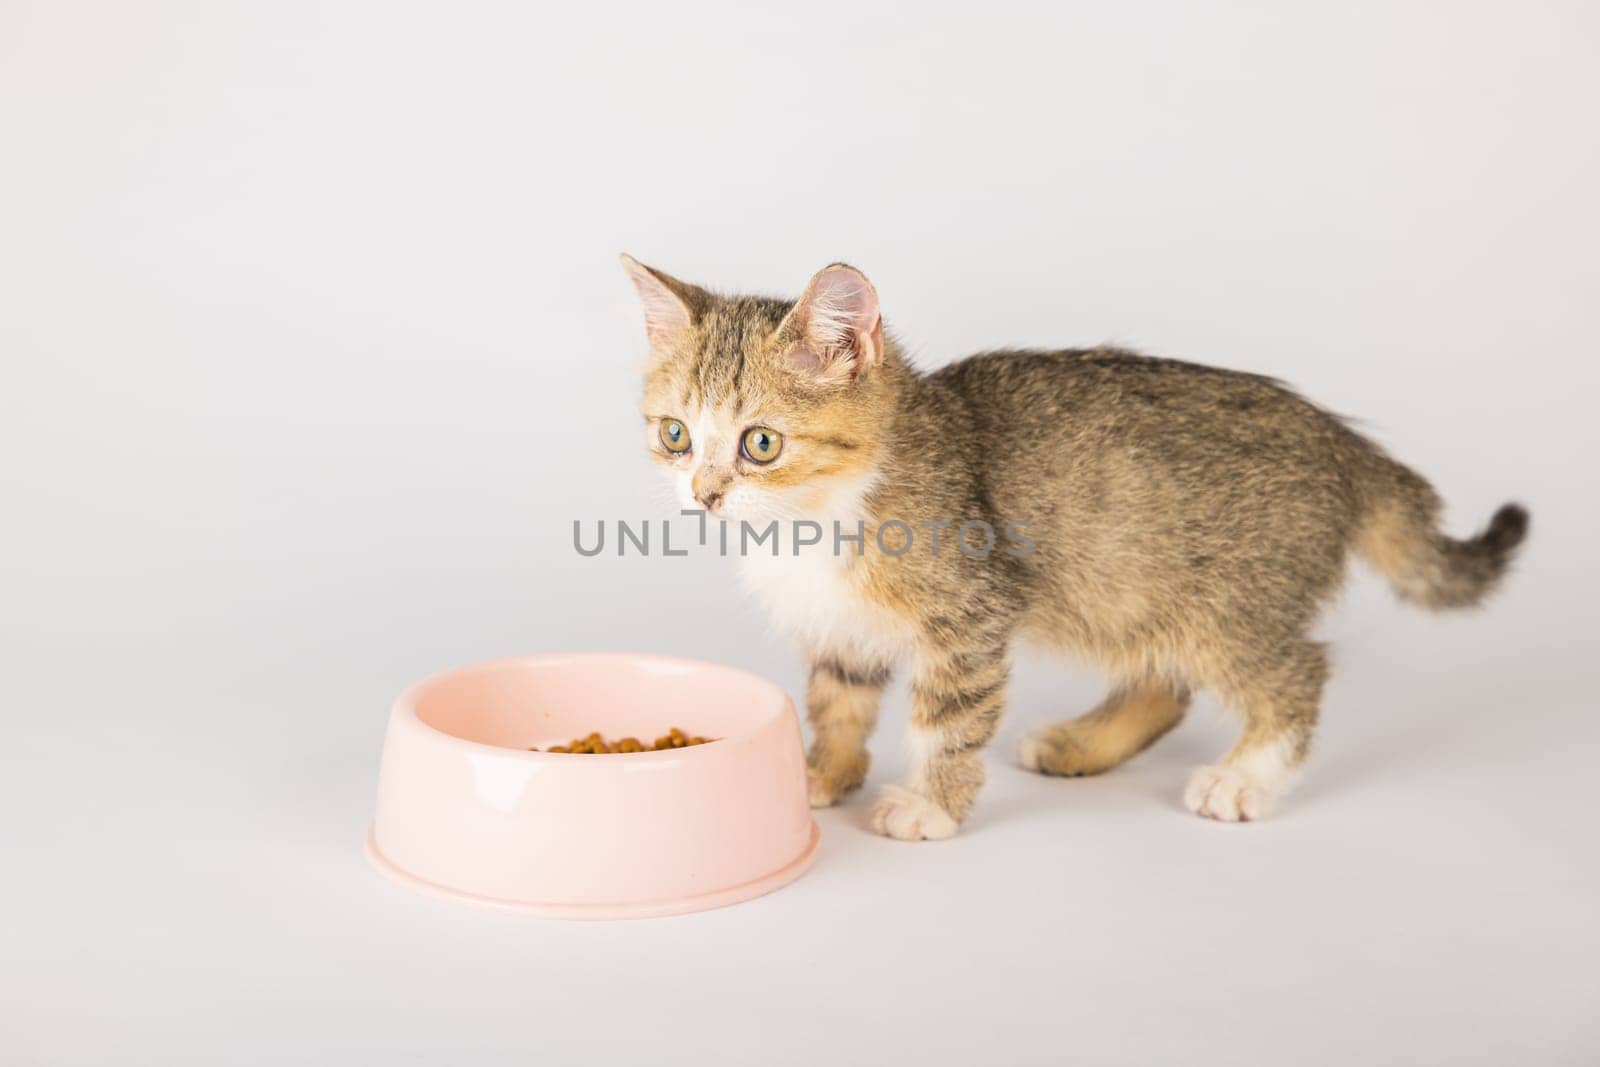 An isolated beautiful tabby cat is sitting next to a food bowl on the floor enjoying its meal. The cat's curious eye and small tongue make for a charming and heartwarming portrait.